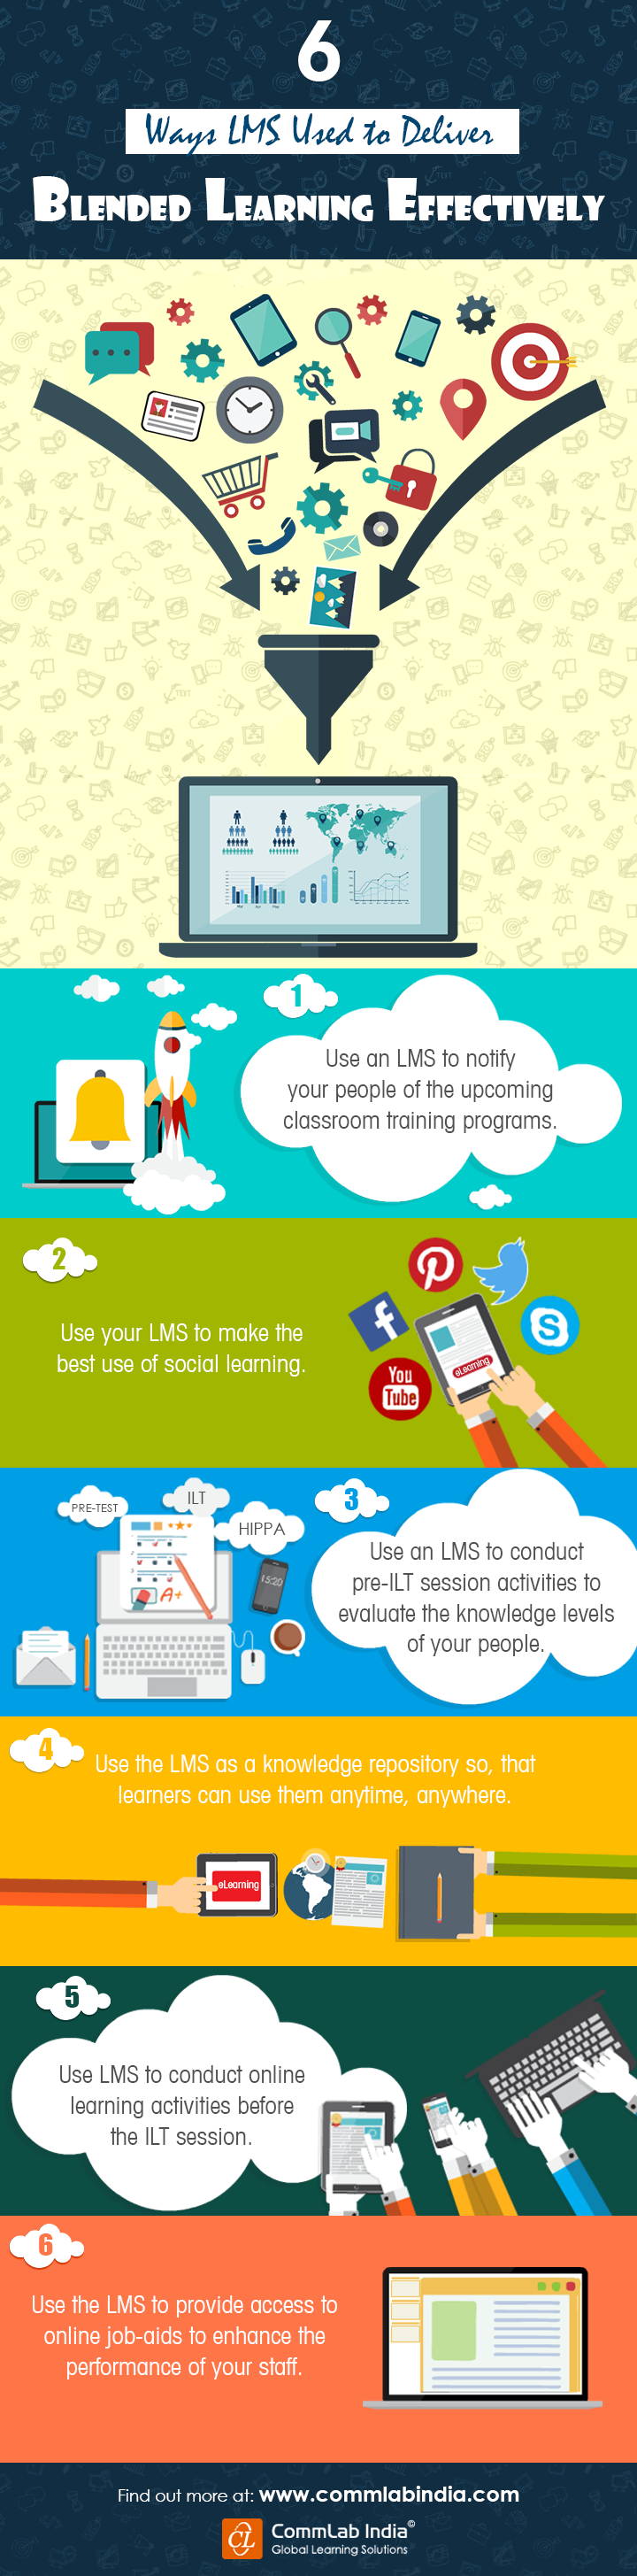 6 Ways An LMS Can be Used to Deliver Blended Learning Effectively [Infographic]